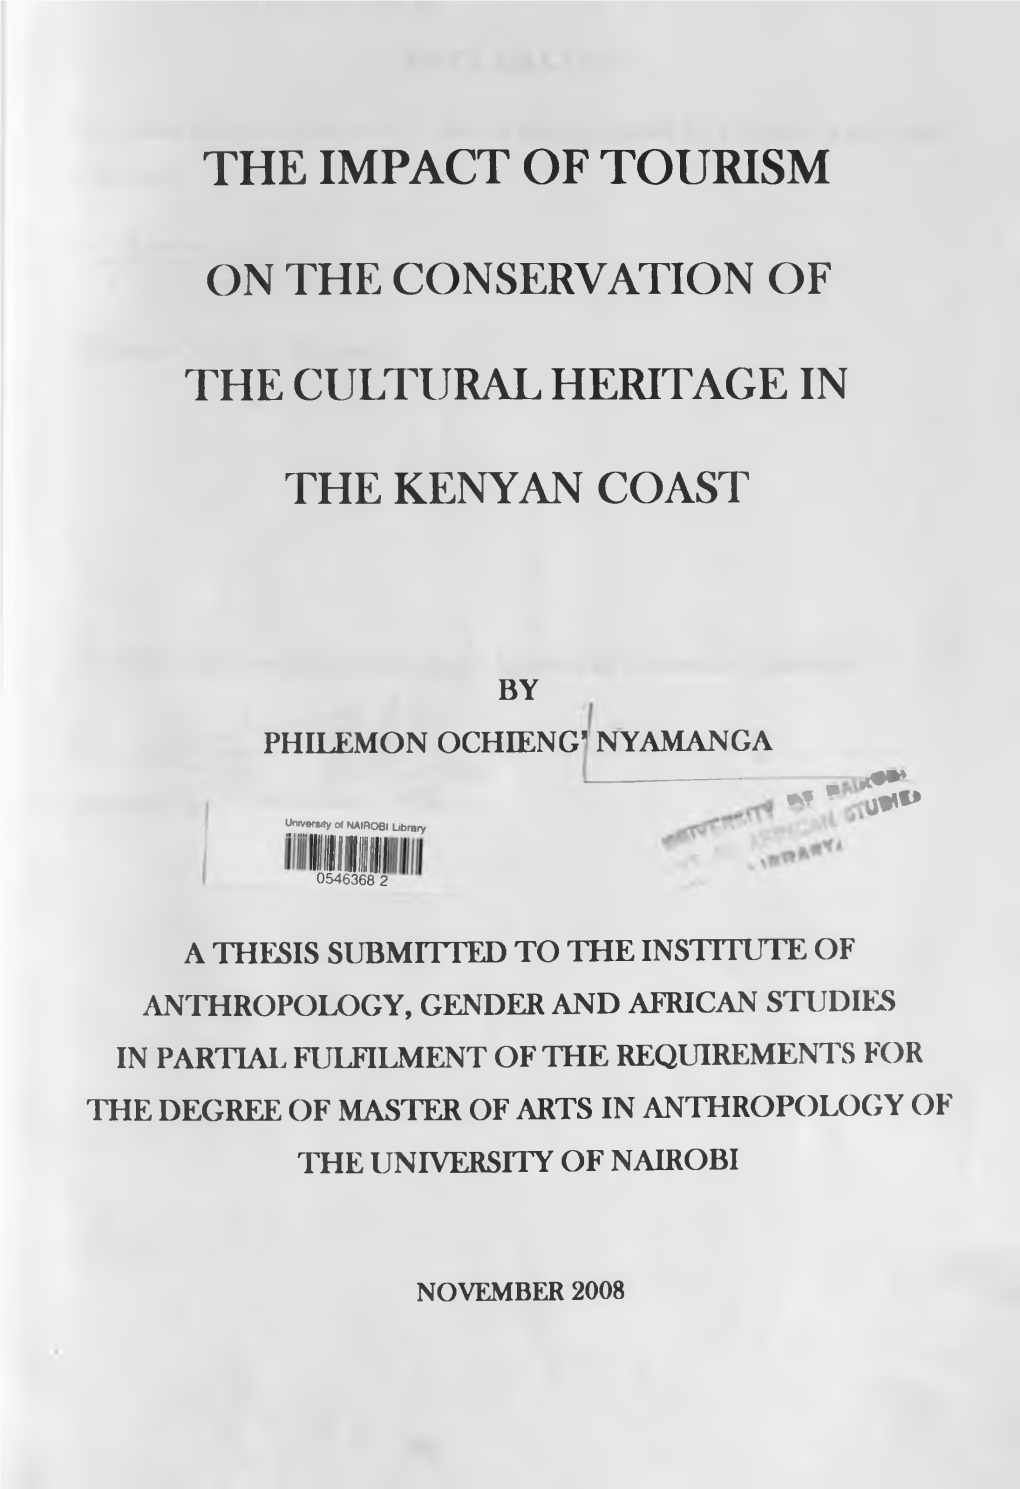 On the Conservation of the Cultural Heritage in the Kenyan Coast